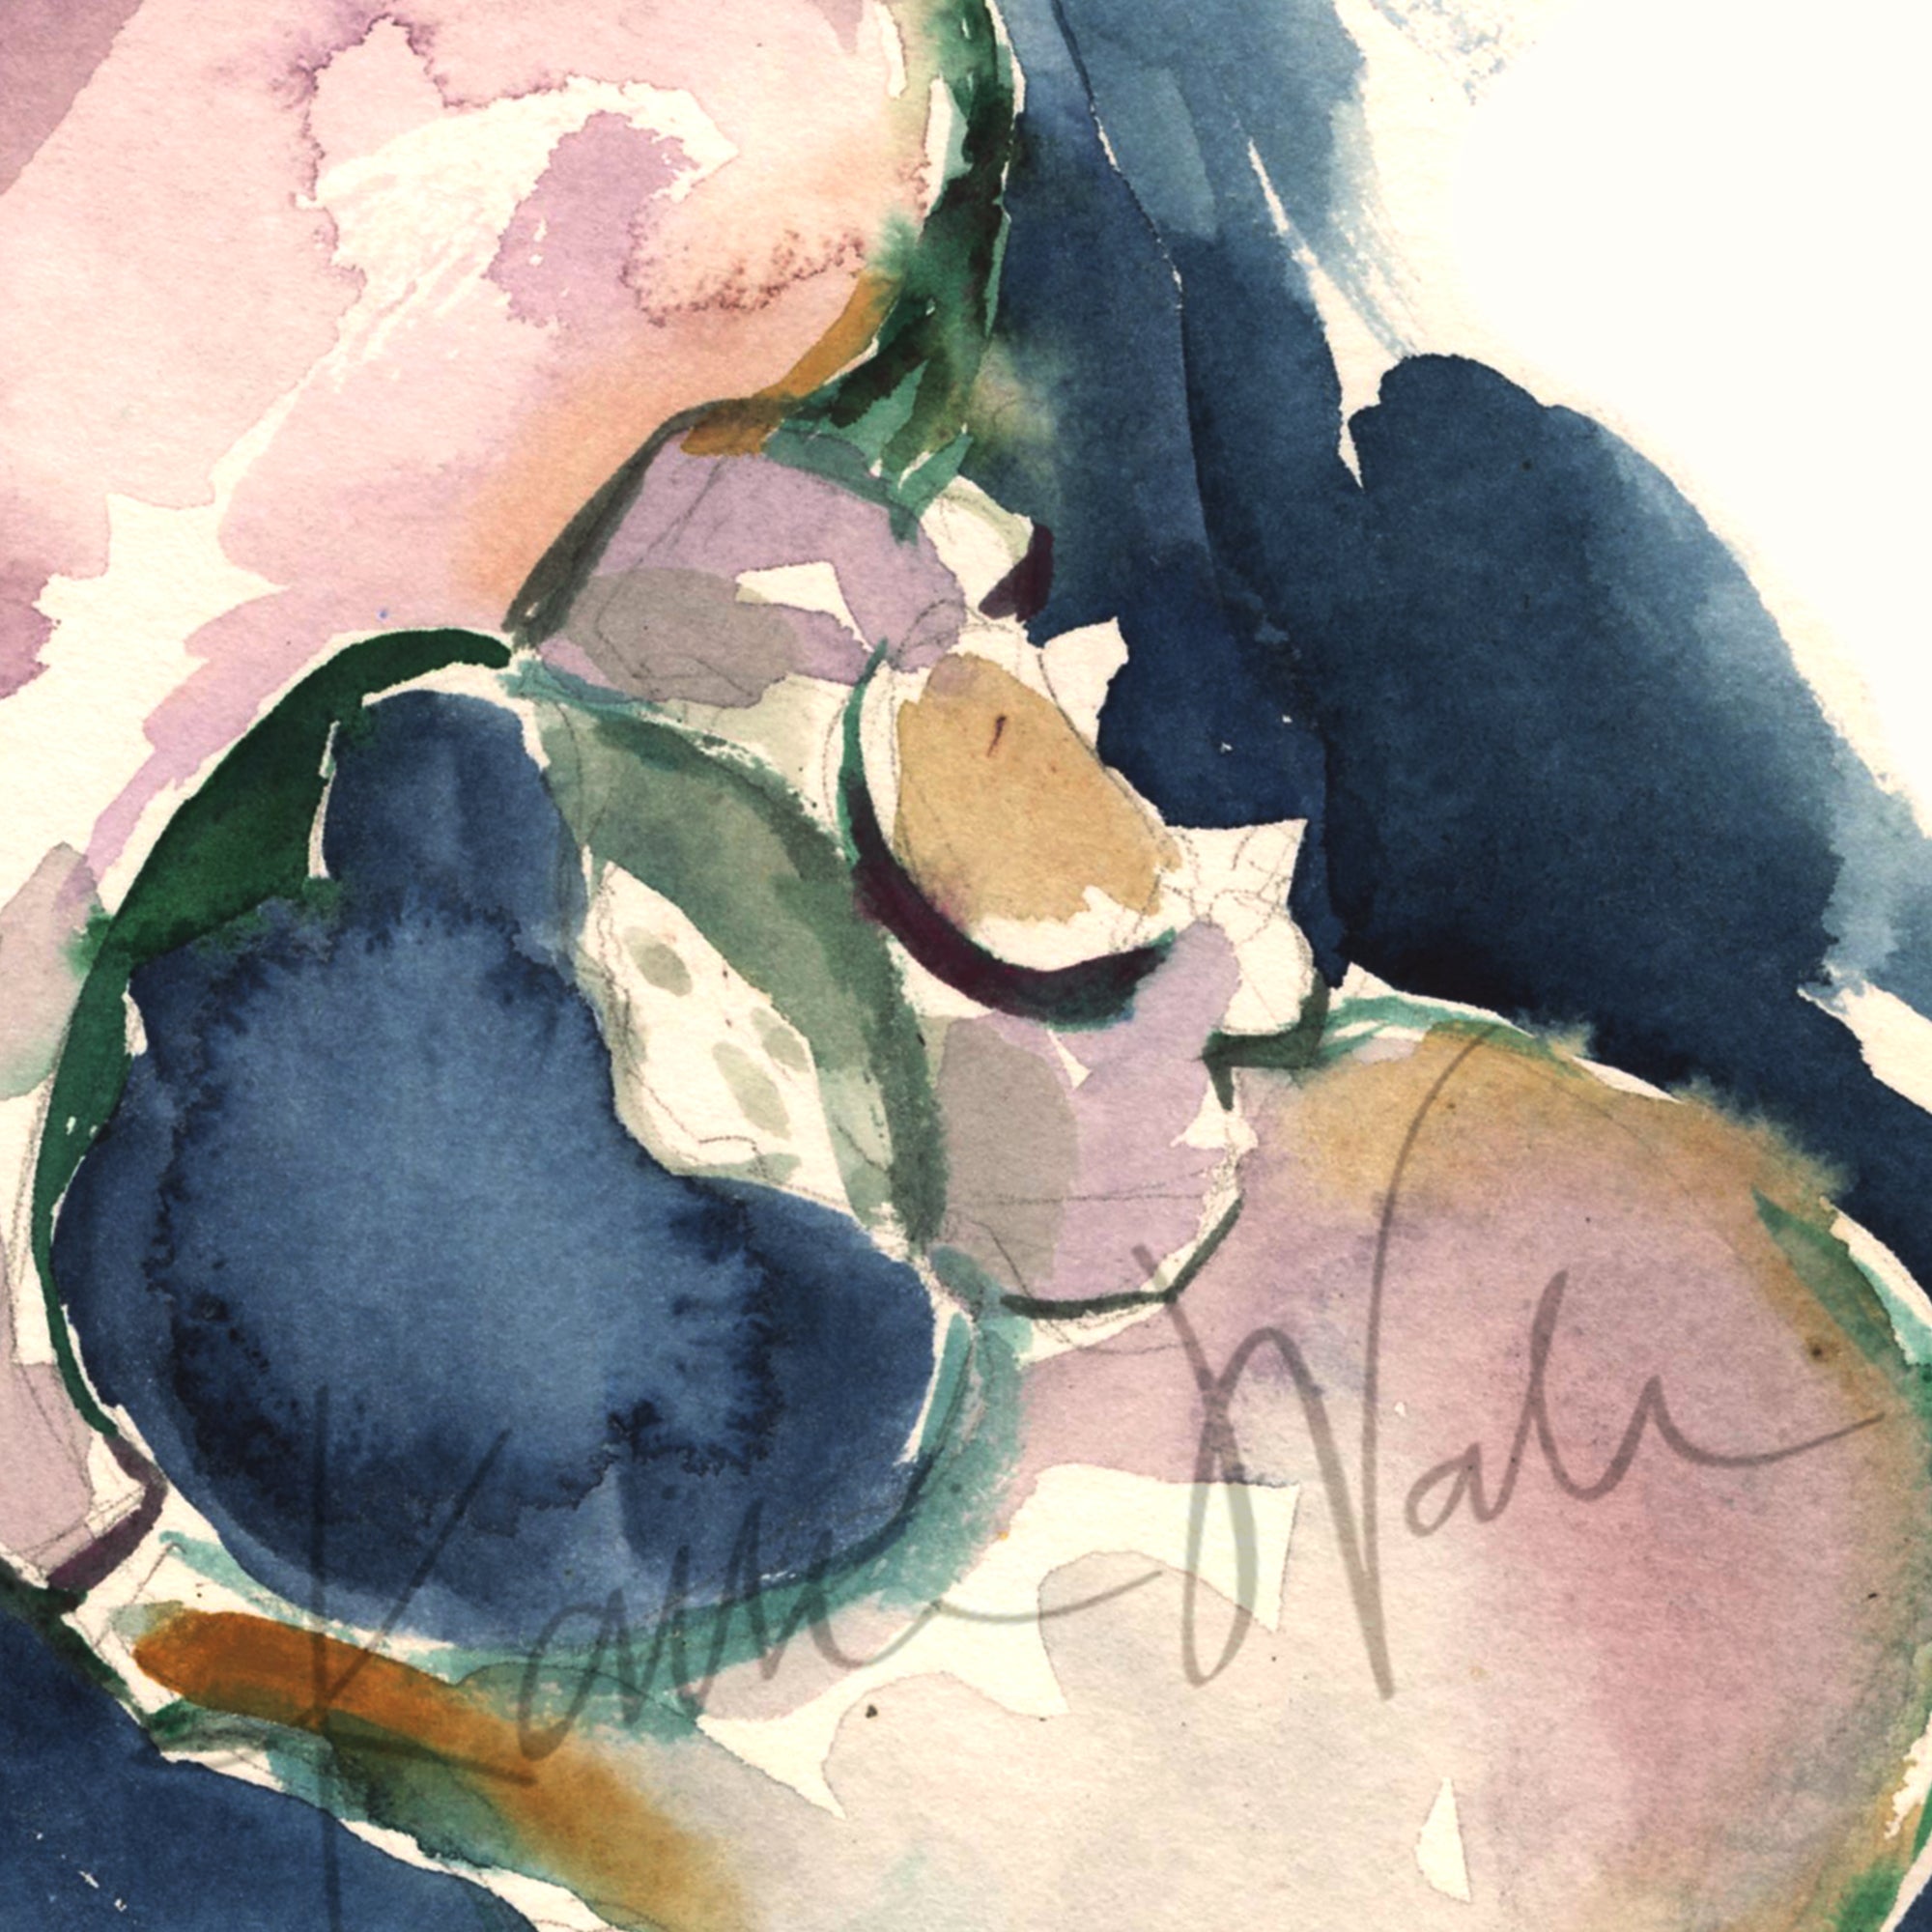 Zoomed in view of a watercolor painting showing a pelvis at an angle in purples, greens, browns, and navy blues.